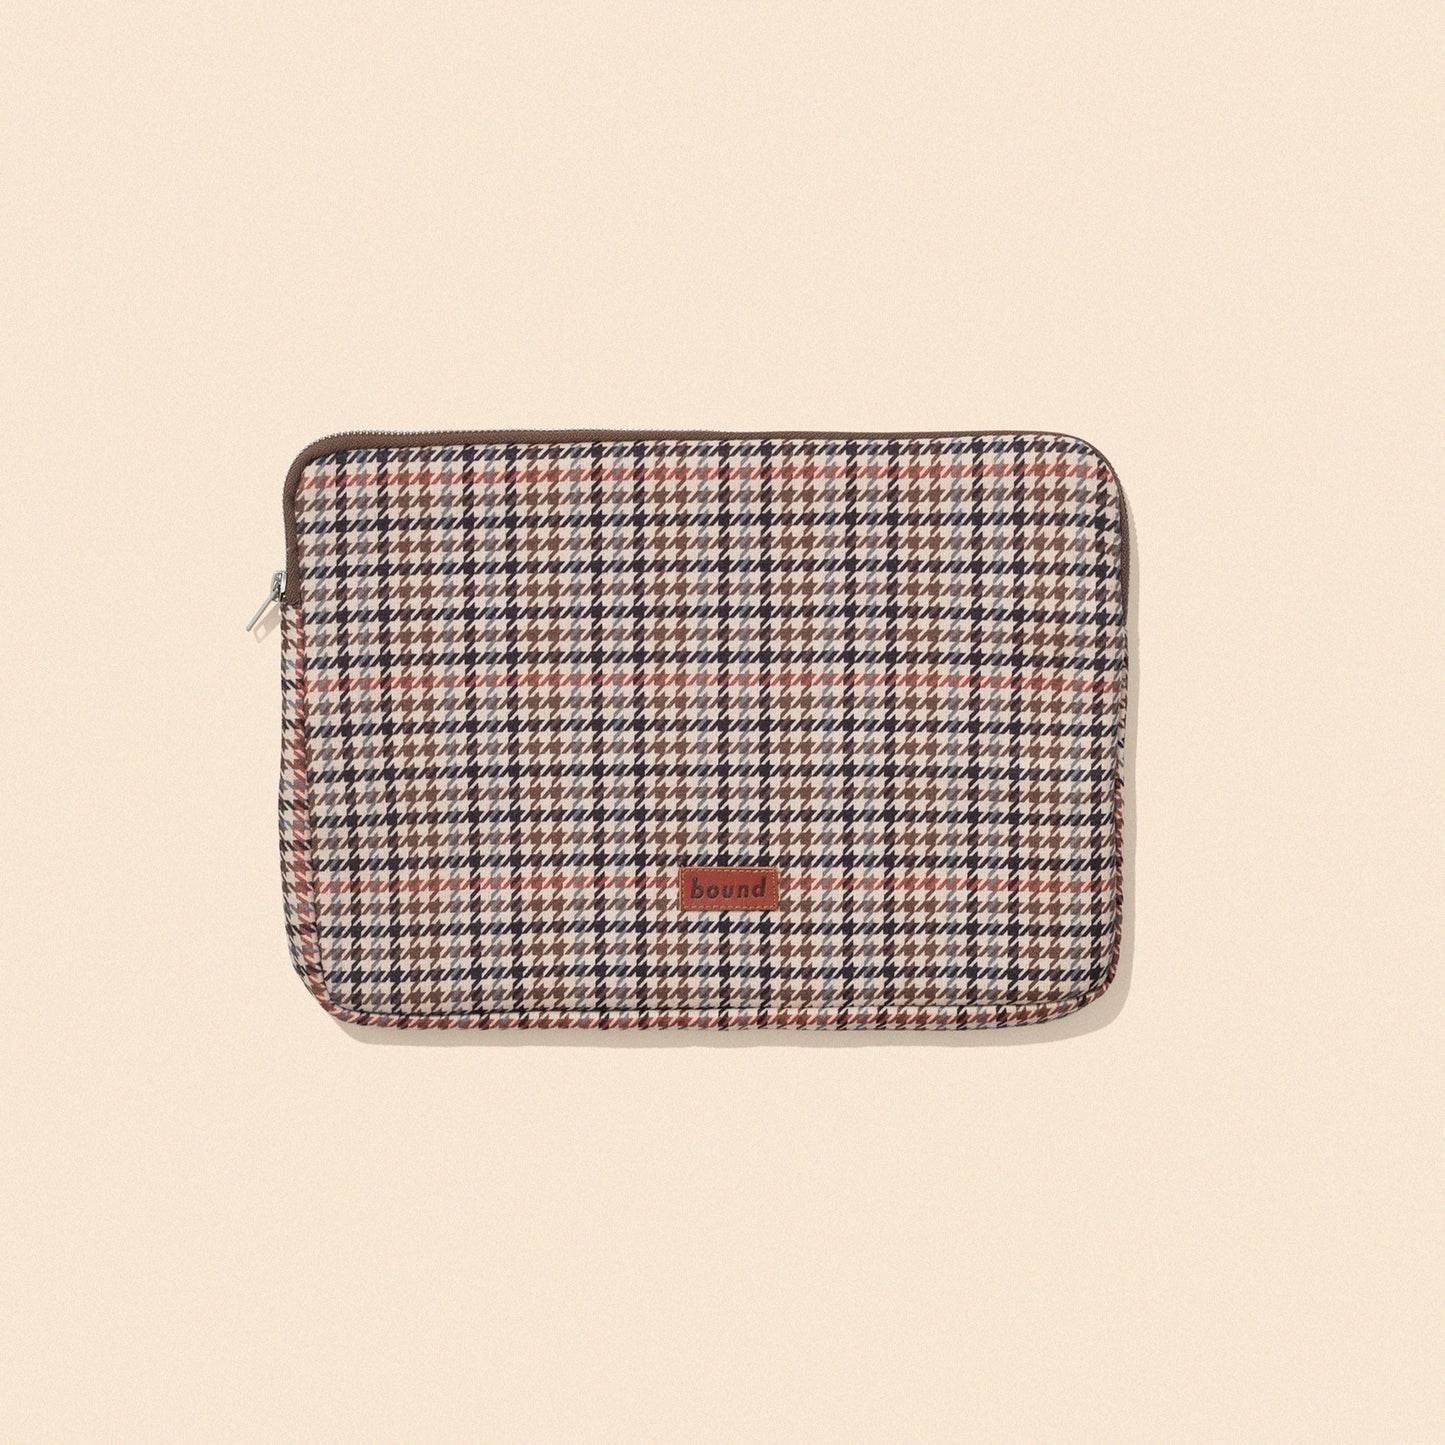 bound 'Classic Dogtooth' 13" Laptop Sleeve